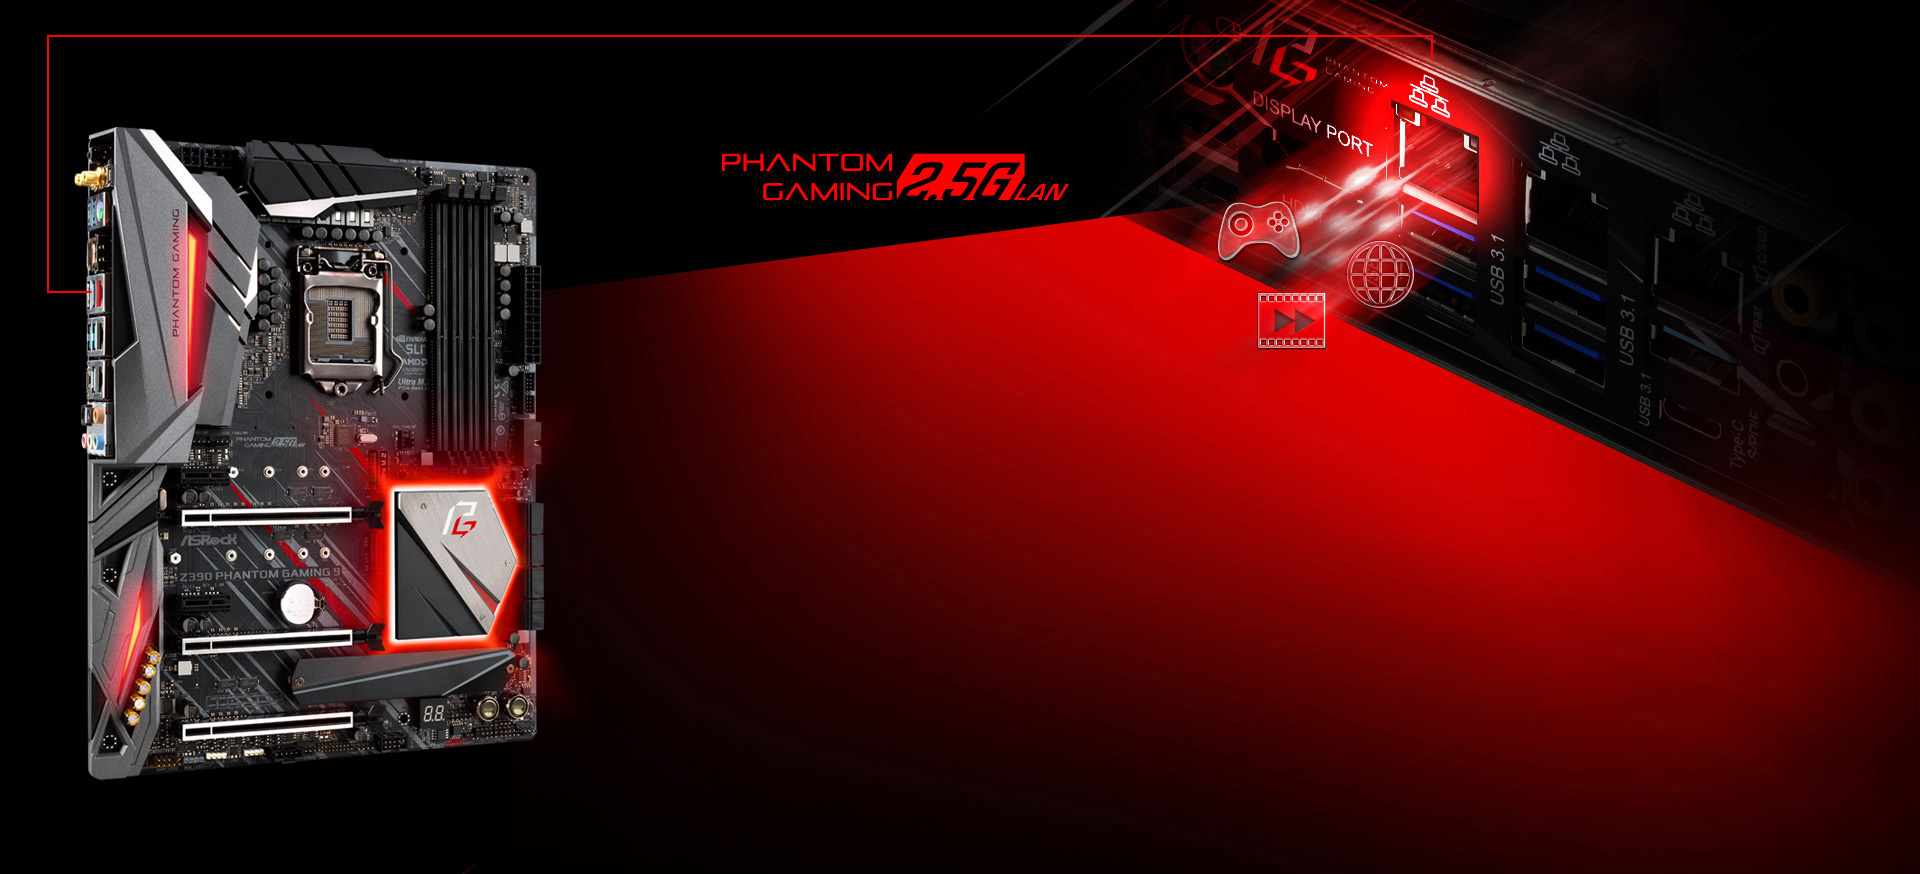 ASRock z390 motherboard standing up next to a closeup graphic of the Phantom gaming 2.5G LAN Port